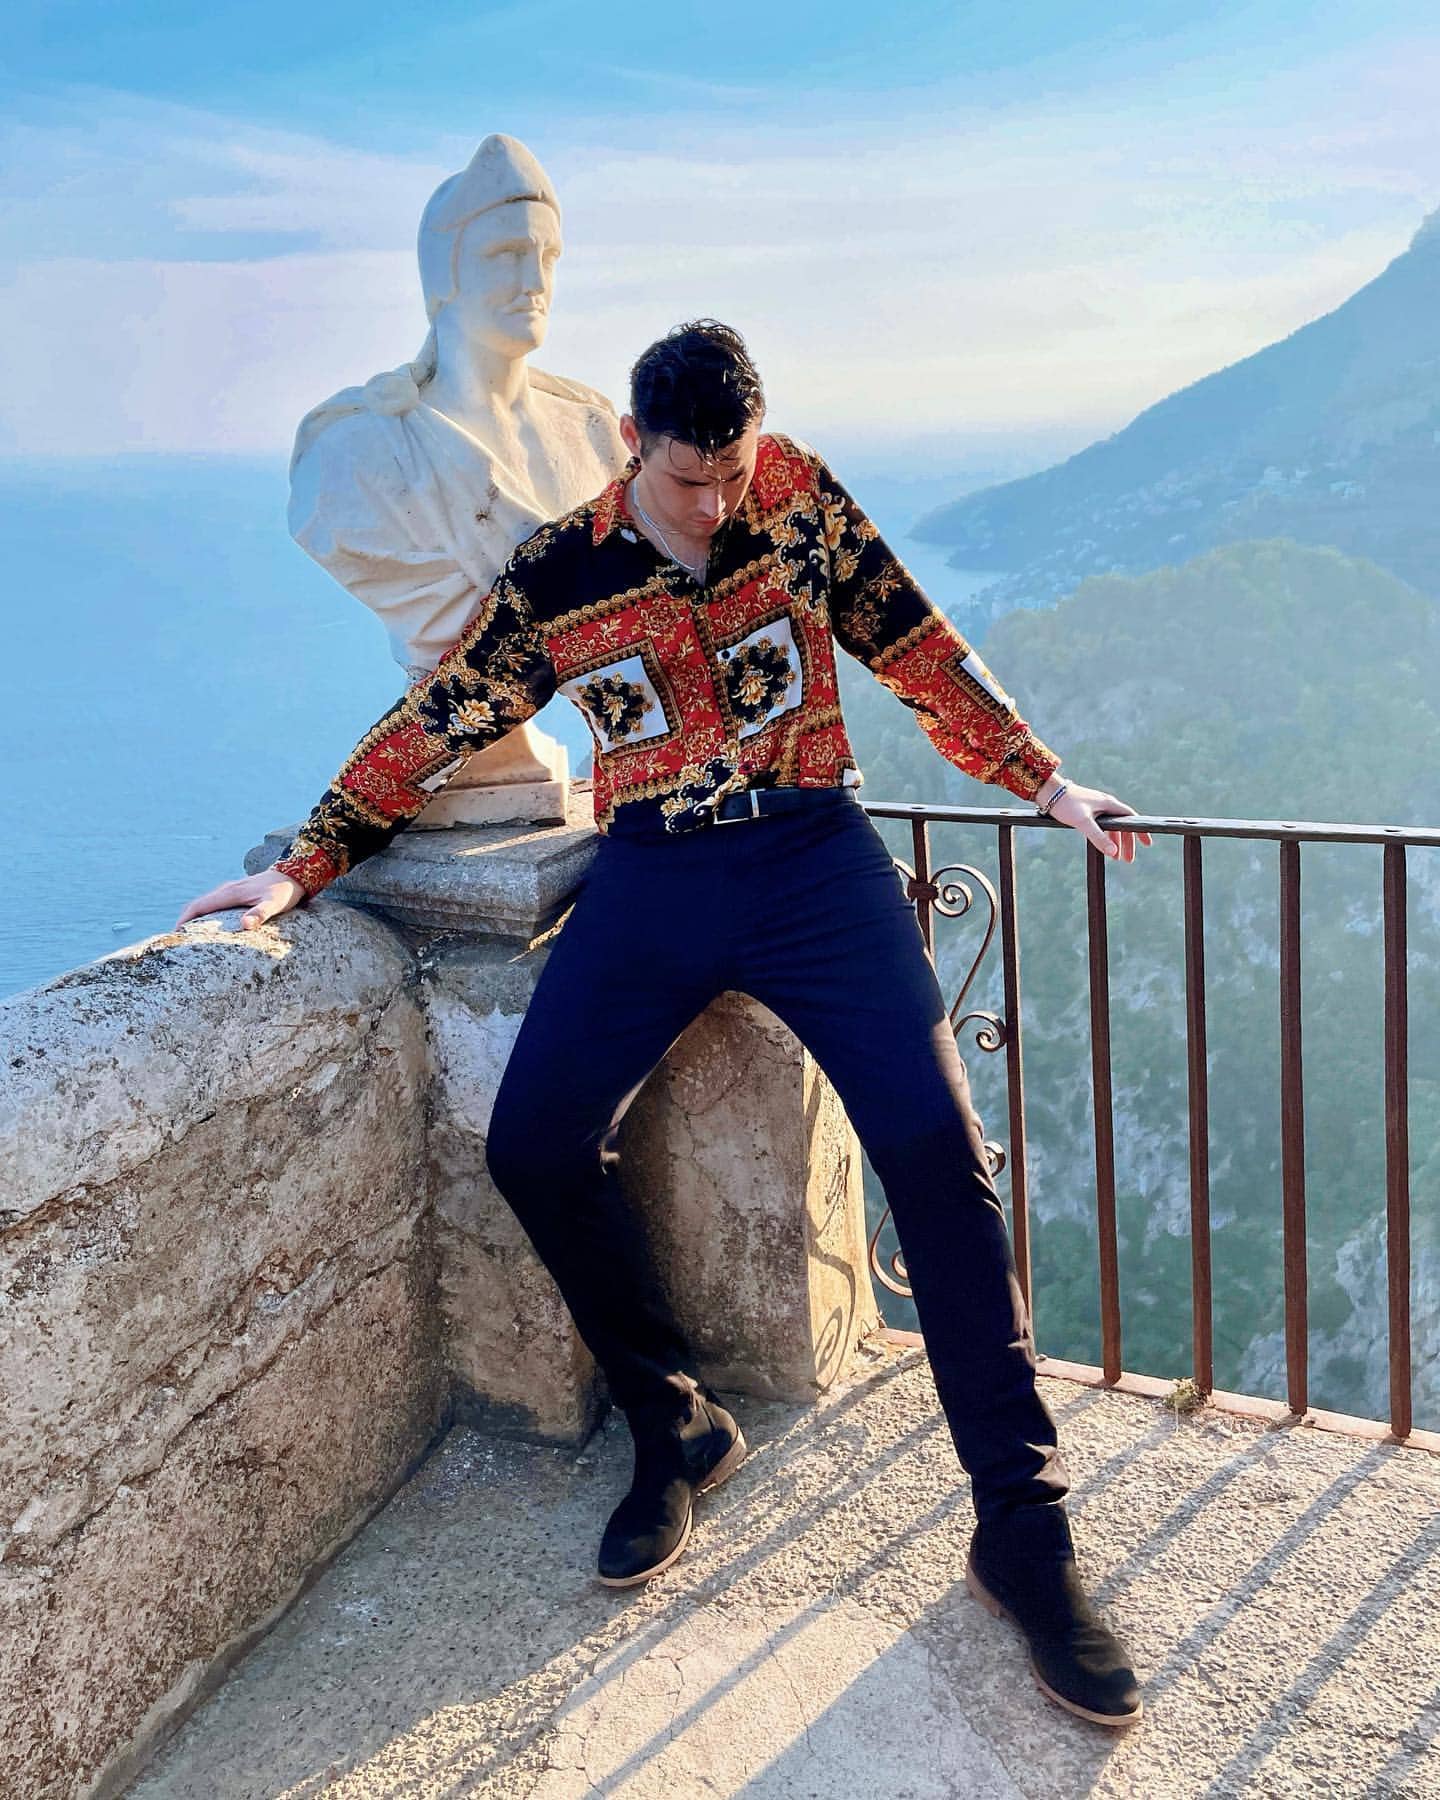 Actor Troy Bronson wearing a baroque-style long sleeve shirt at a balcony in Ravello on the Amalfi Coast, Italy, showcasing historic statues.